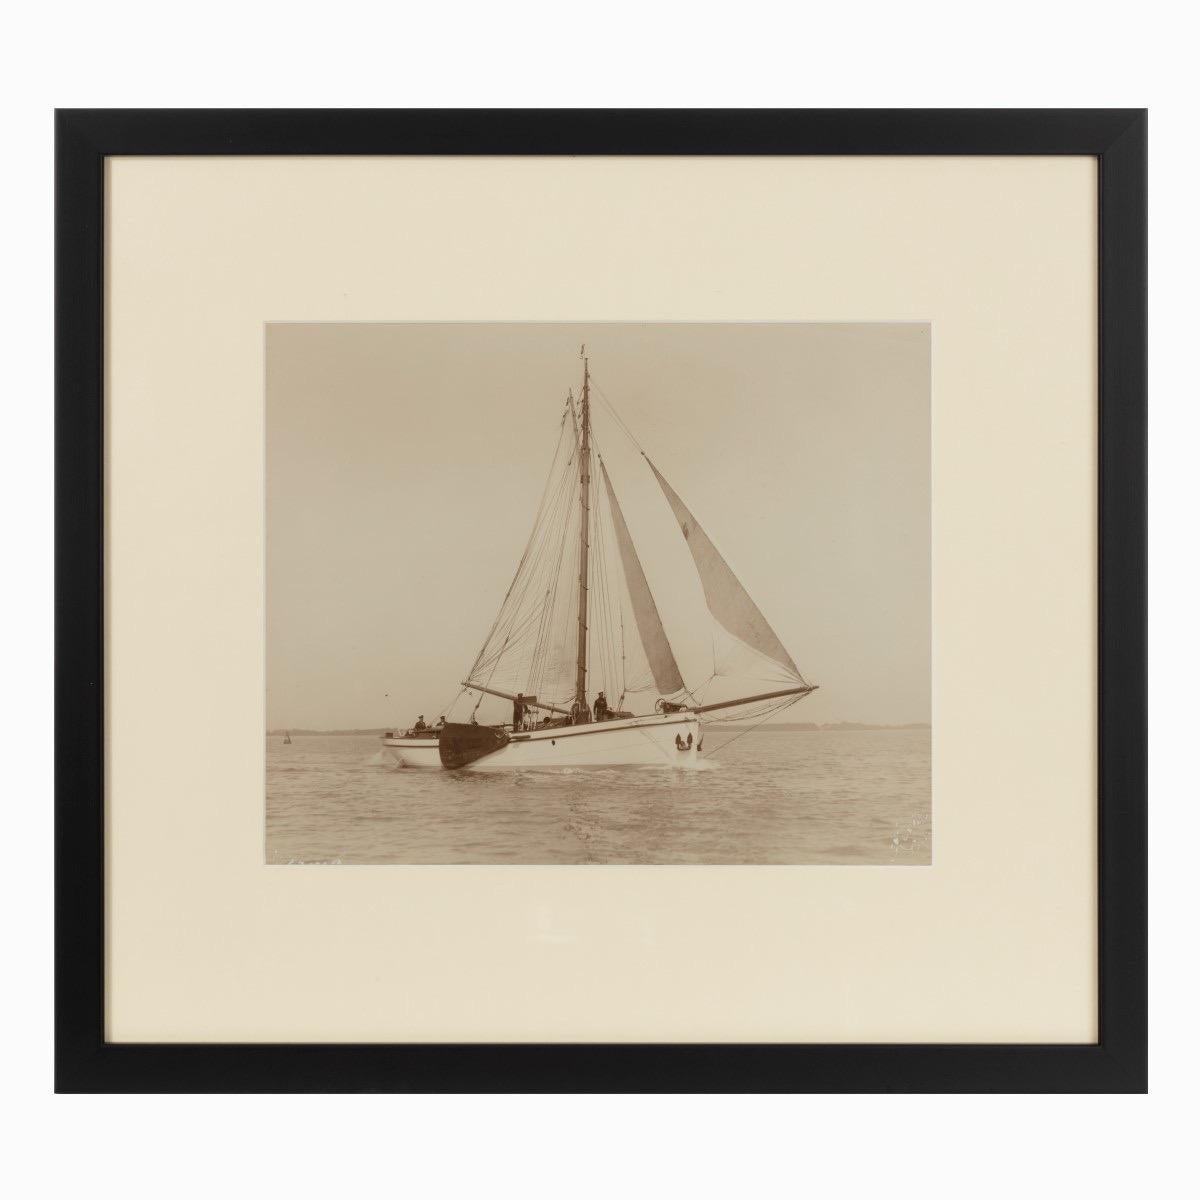 Original prints of the Dutch sailing yacht Verona sailing on port tack in the Solent.
An interesting point in this image is that she has a loose footed mainsail,
circa 1920

Signed/Inscribed: Signed Kirk Cowes.